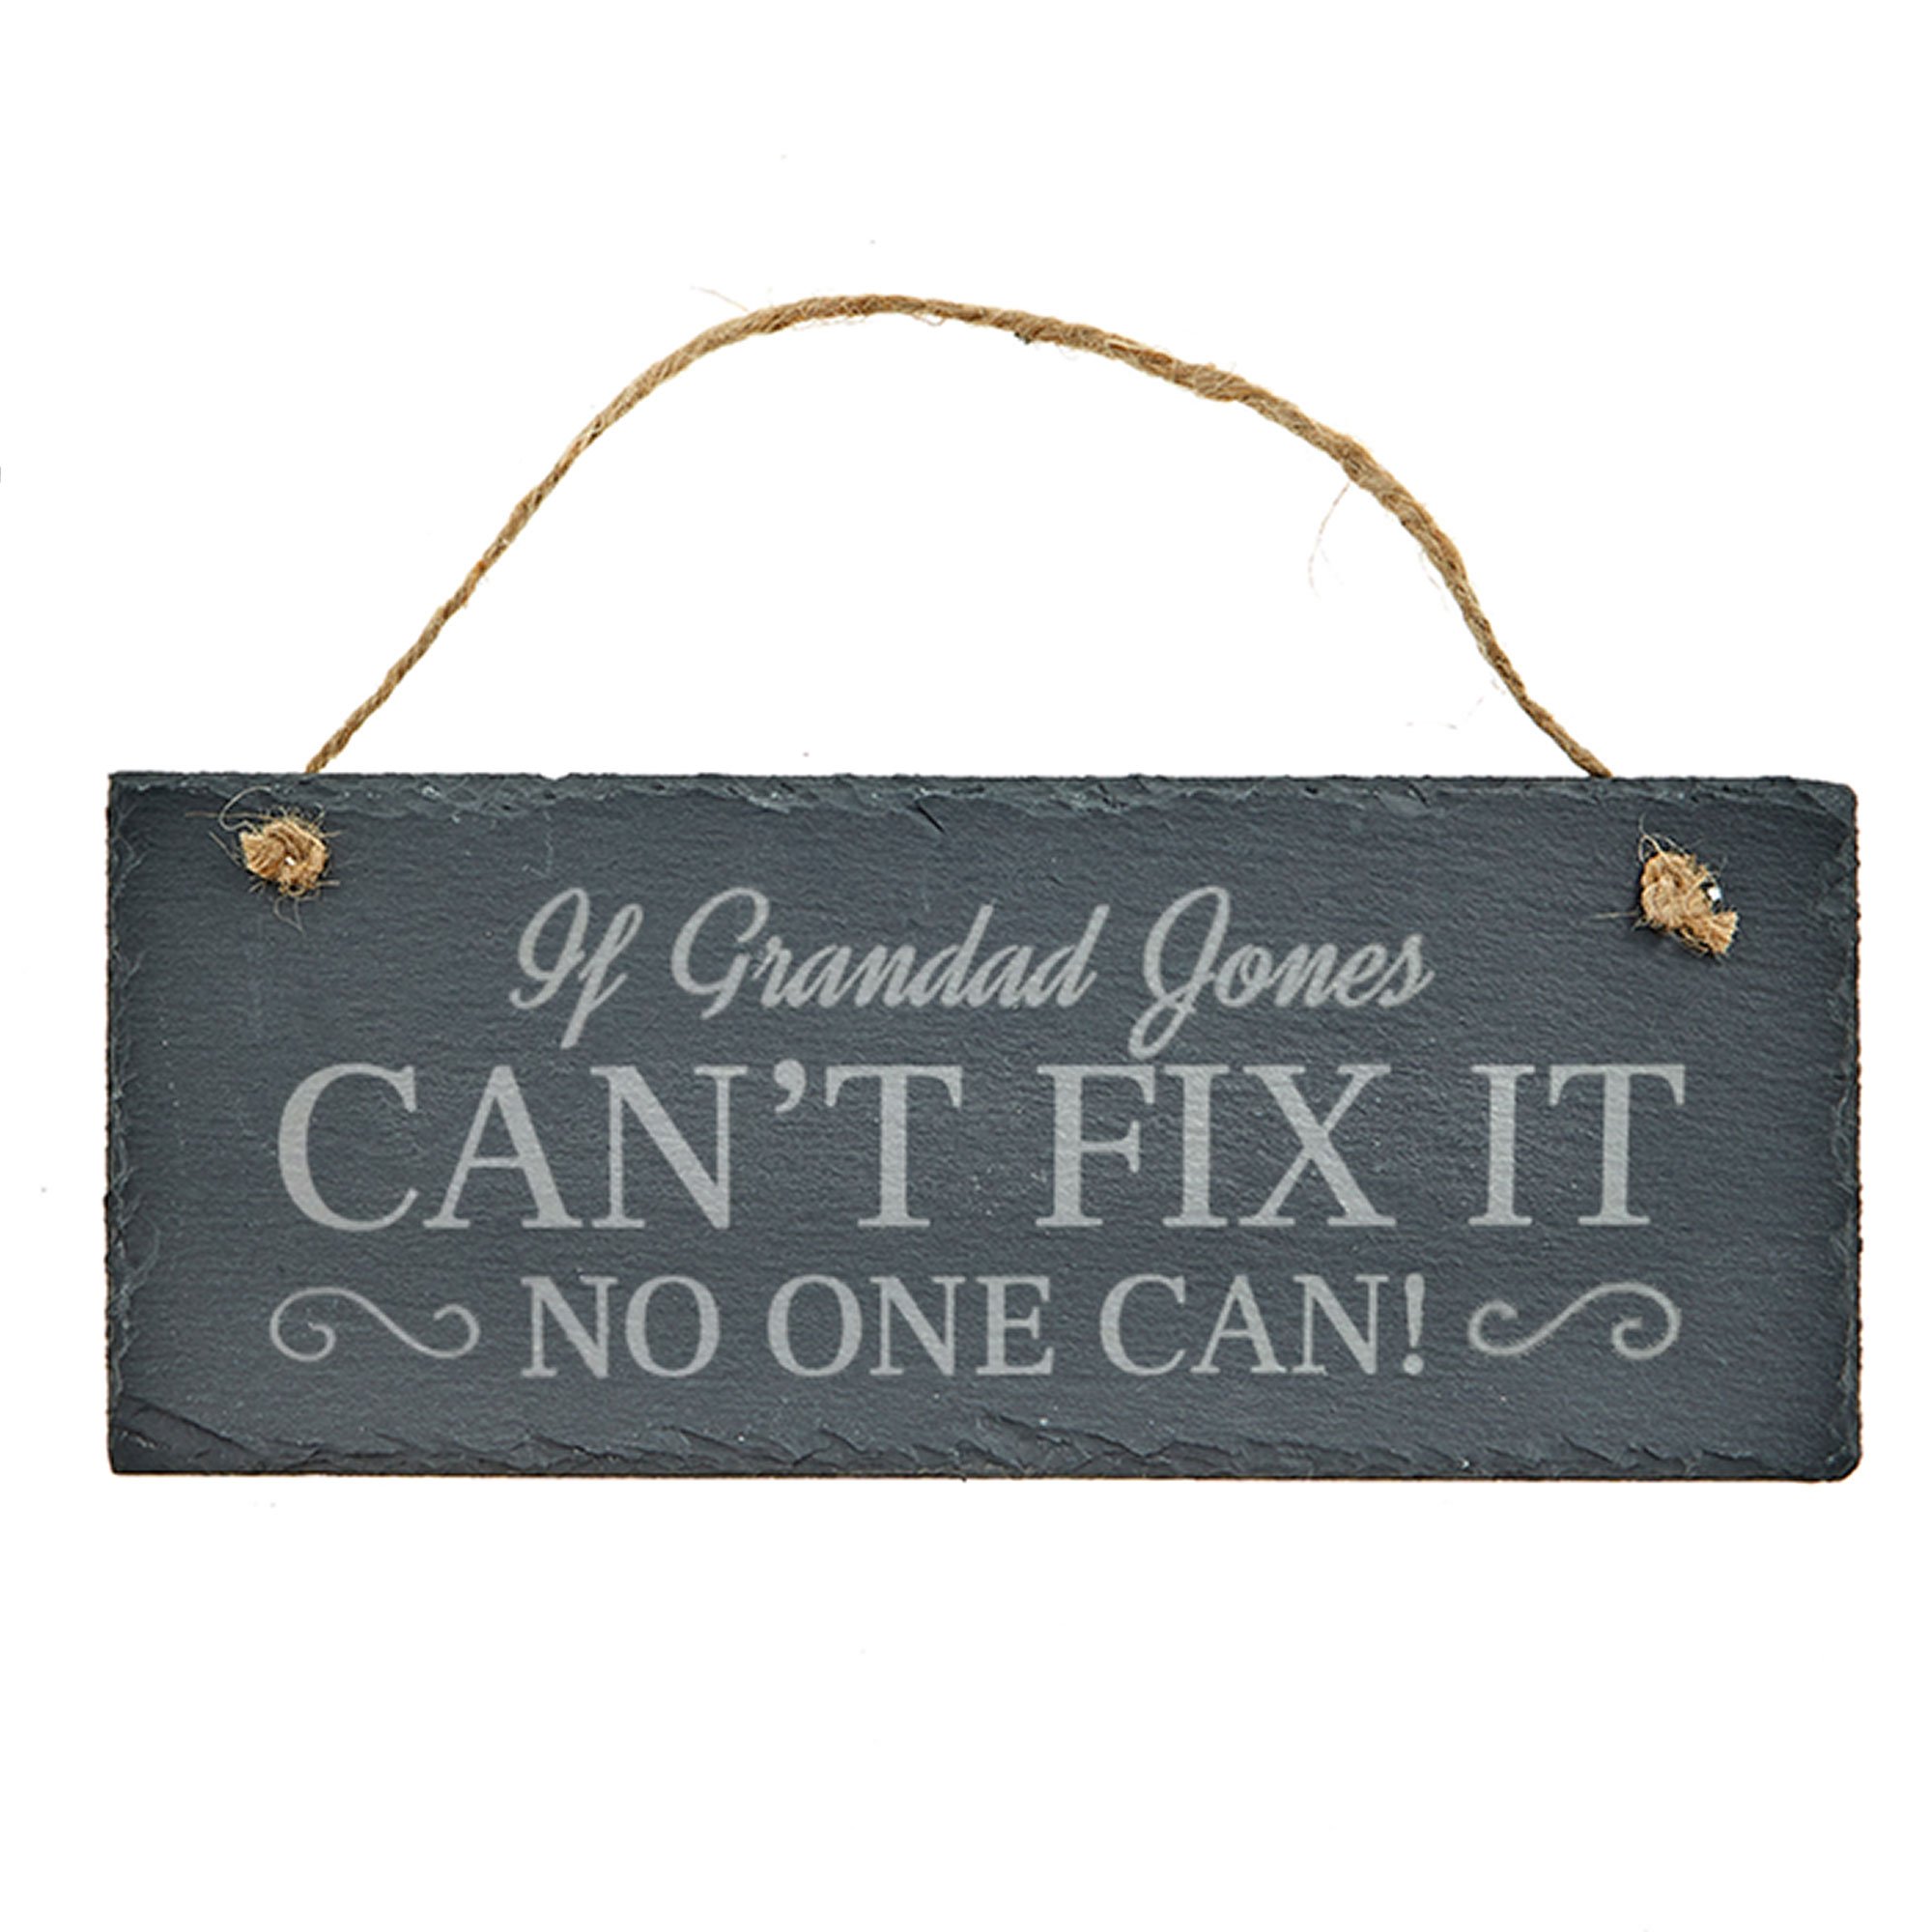 Personalised Engraved Hanging Slate Sign - If They Can't Fix It, No One Can